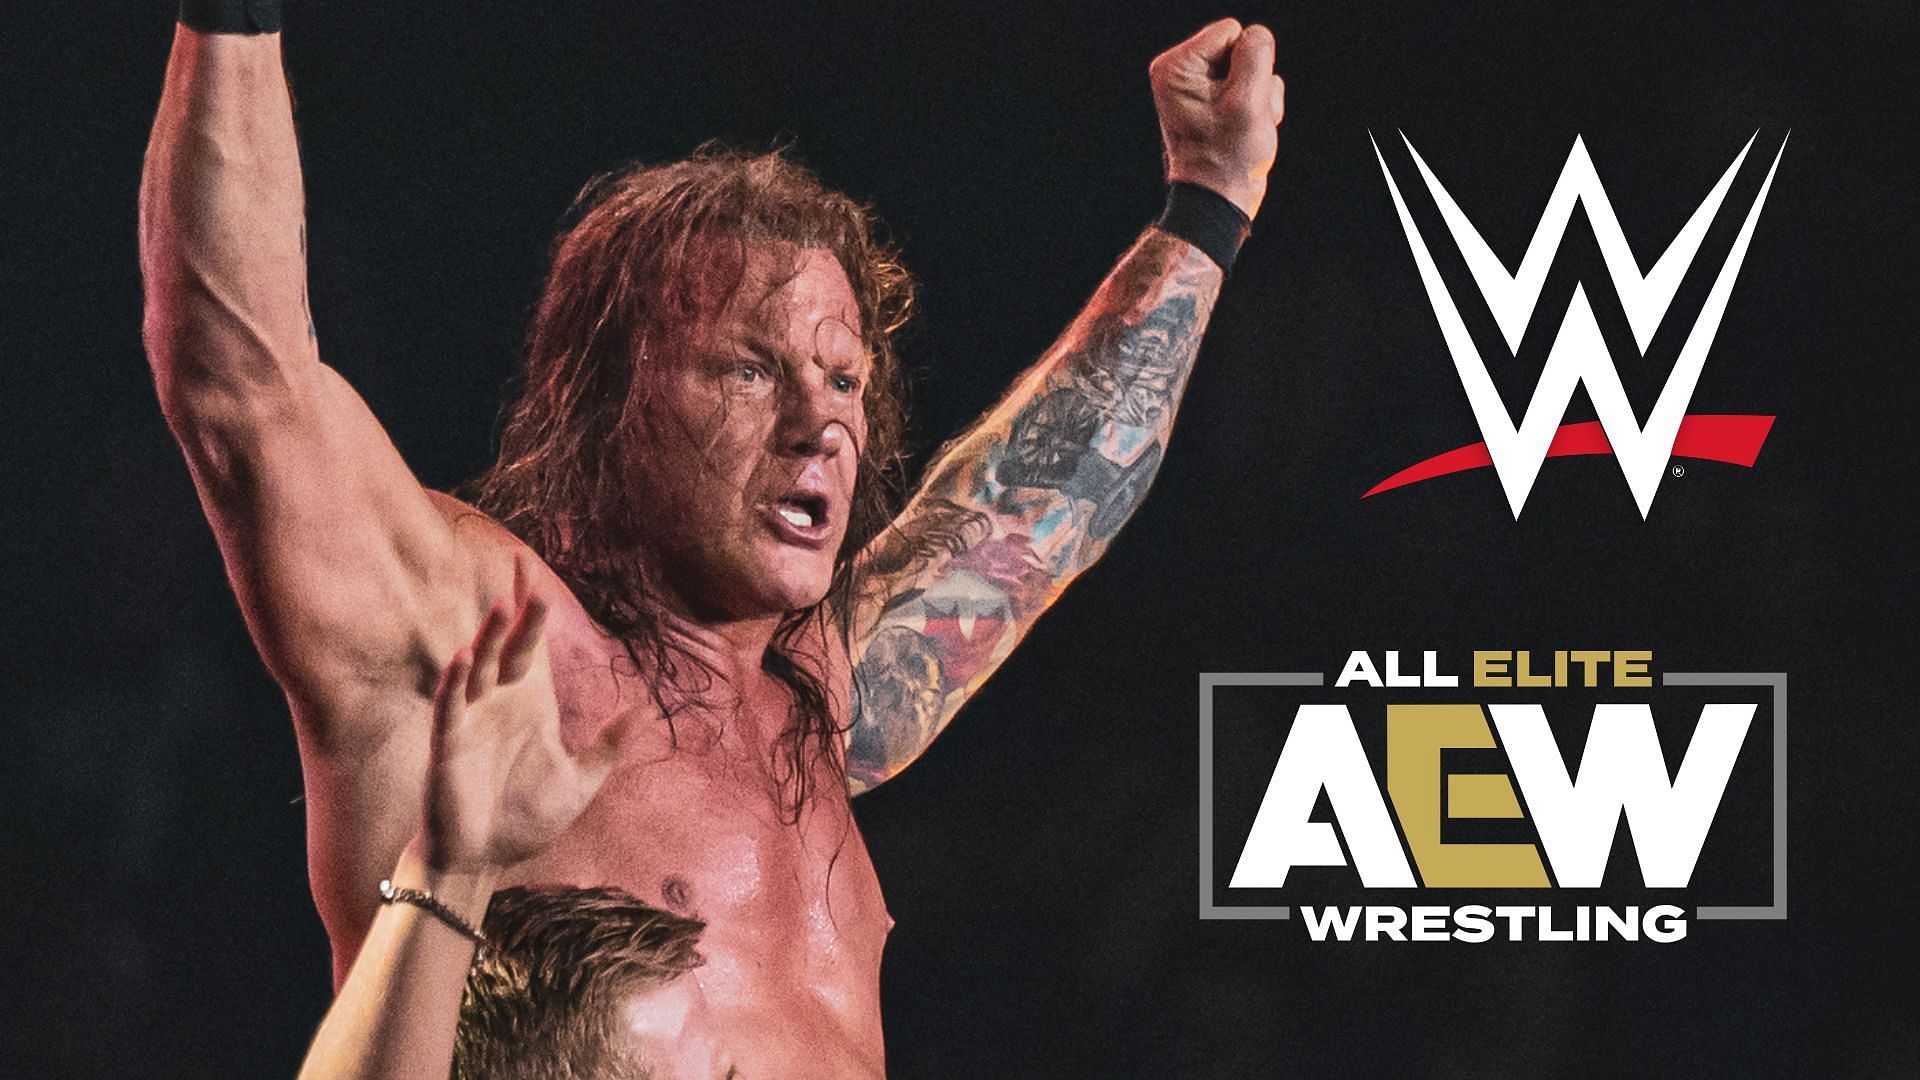 Chris Jericho wanted to face a former WWE Tag Team Champion on AEW Dynamite